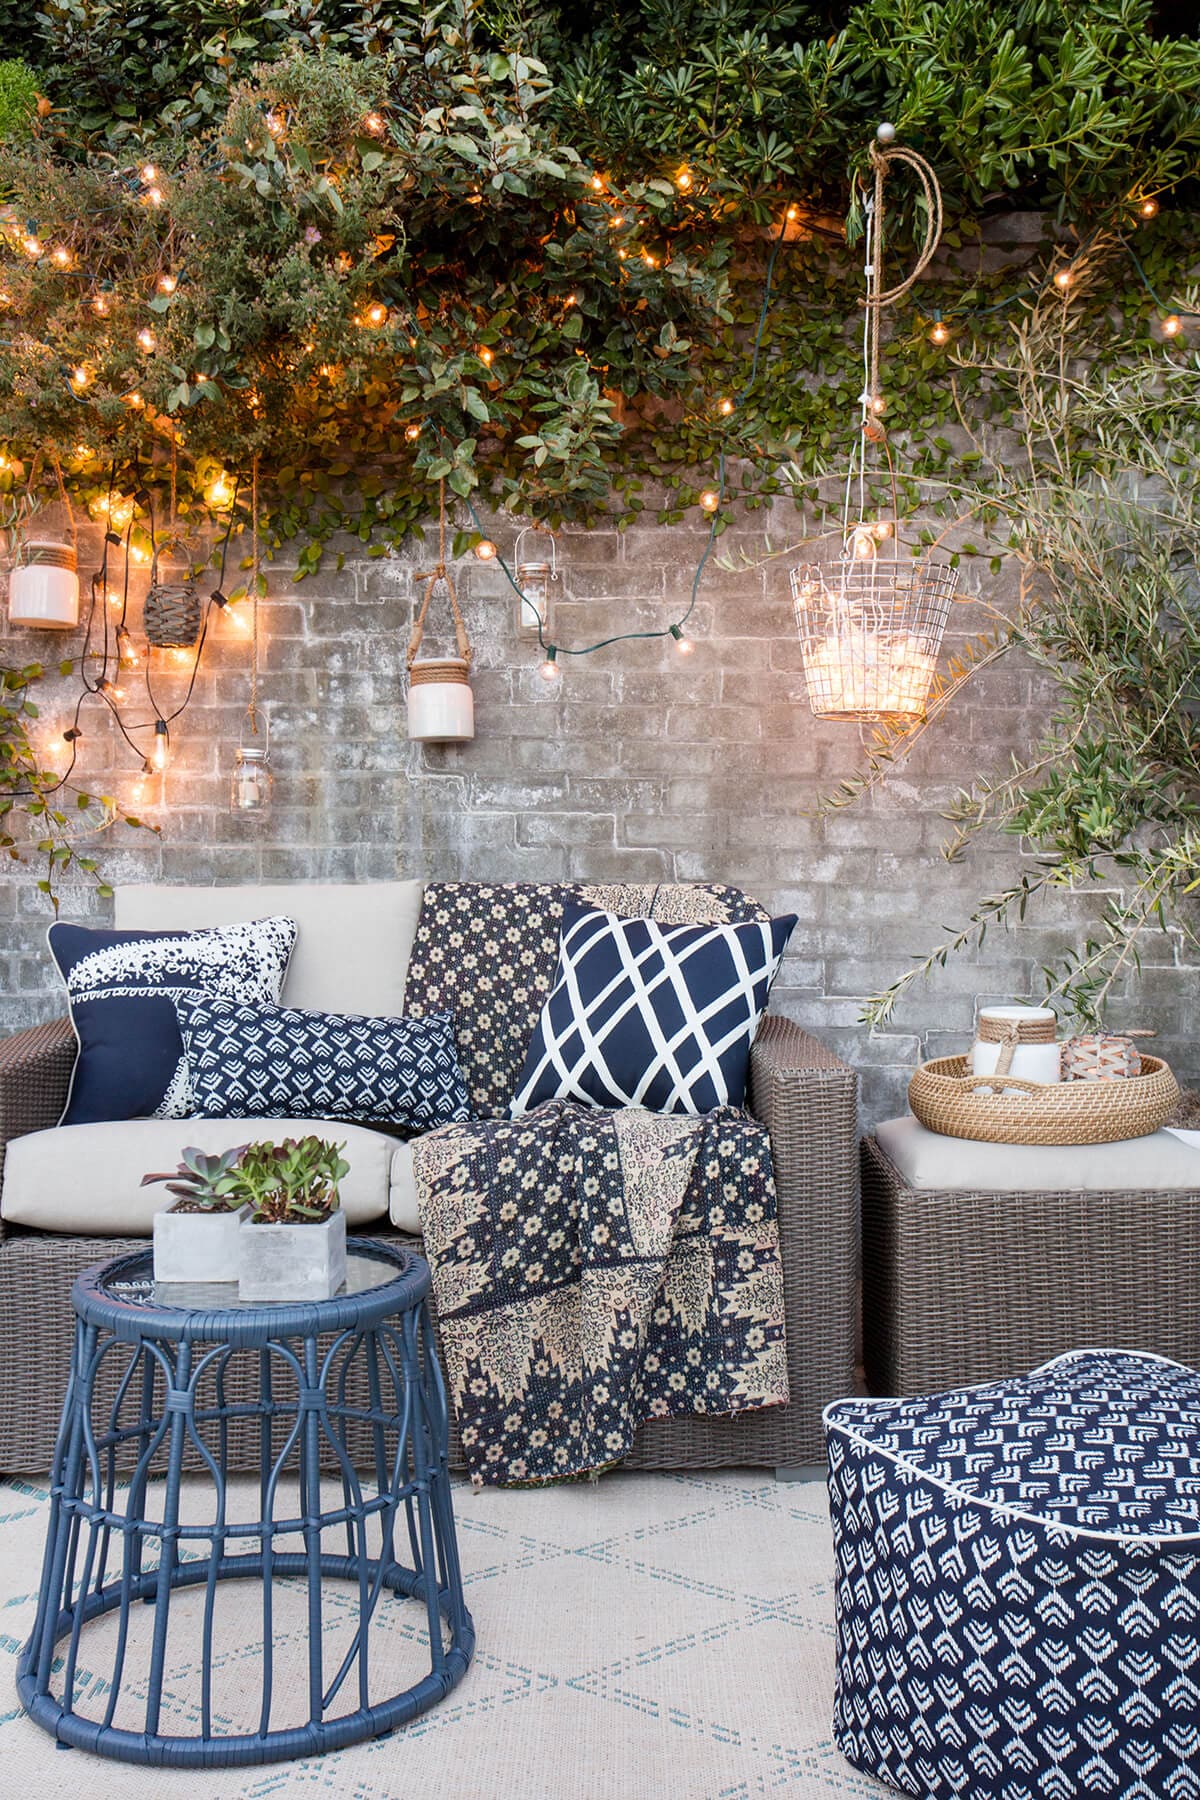 23 fabulous lighting ideas to liven up your outdoor living space - 85